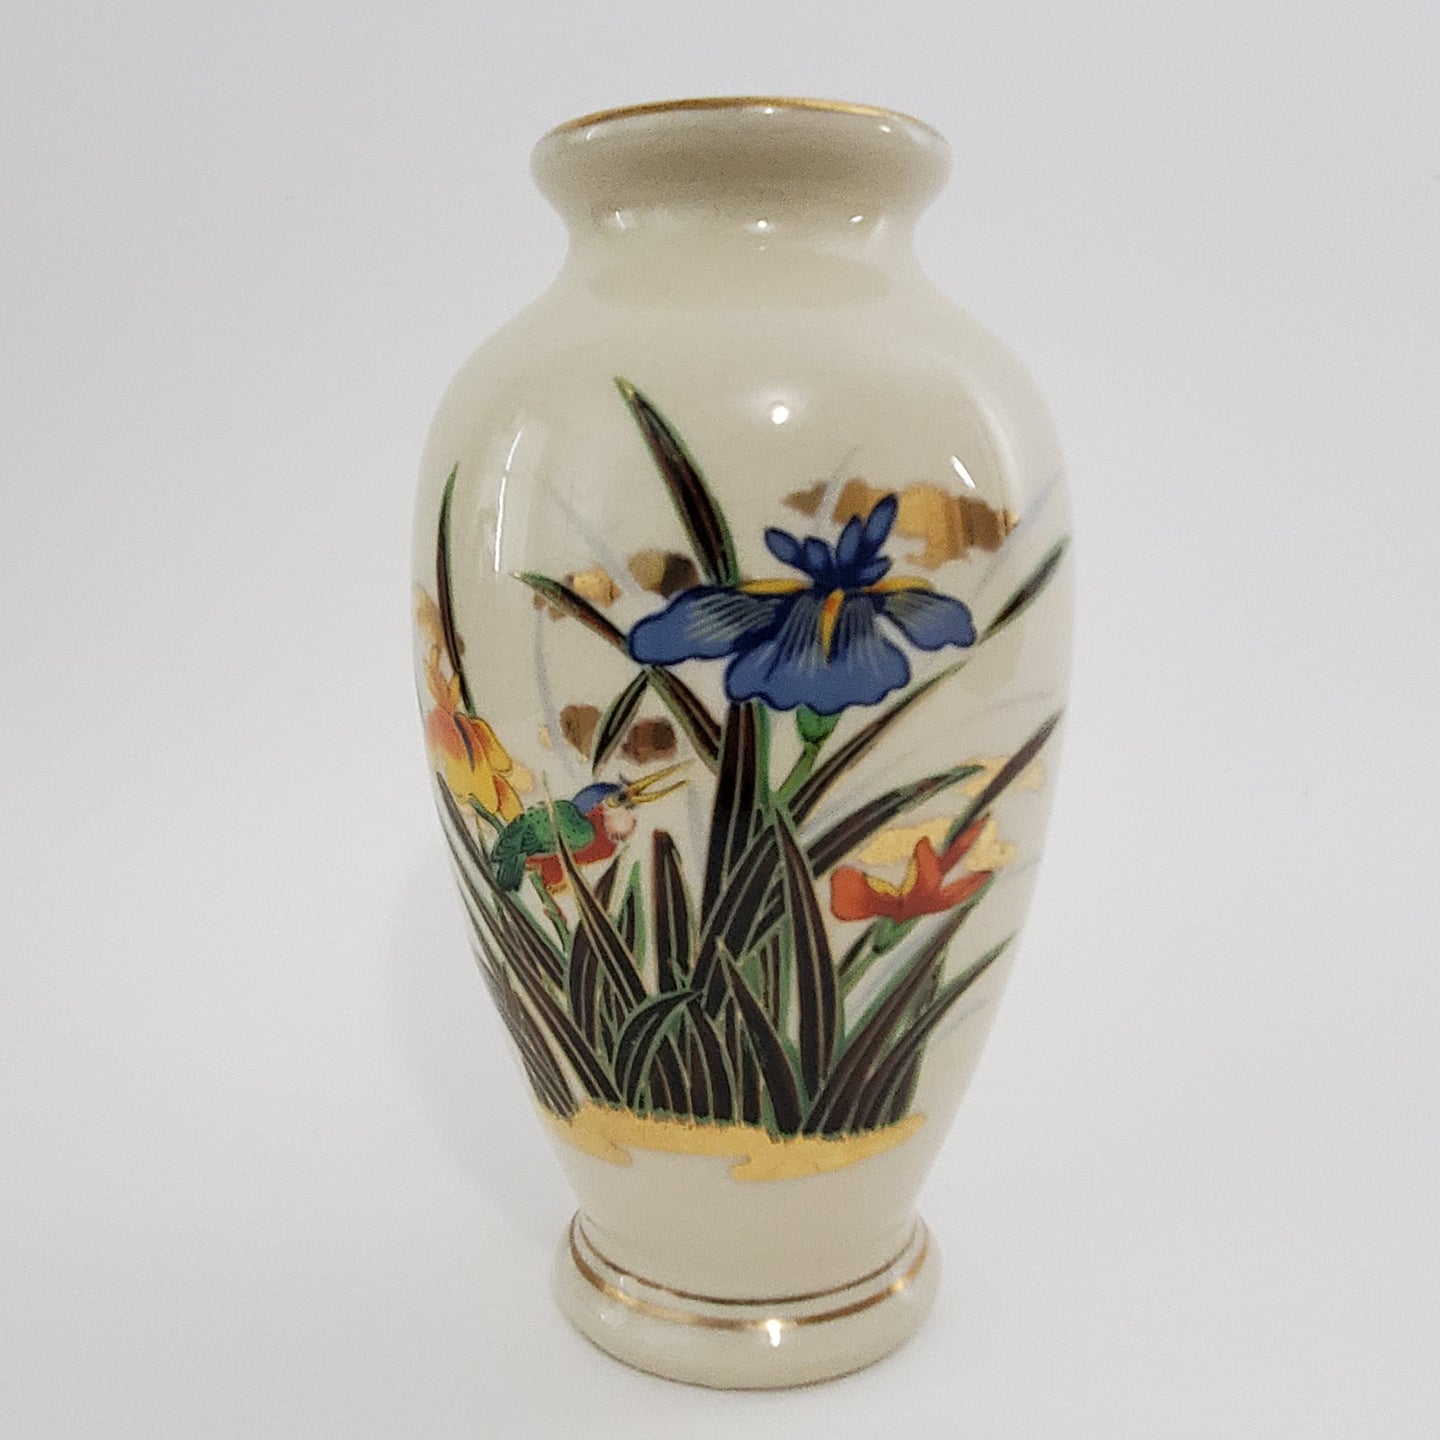 Vintage Vase with Iris Flowers and Kawasemi Kingfisher Bird Made in Japan 9